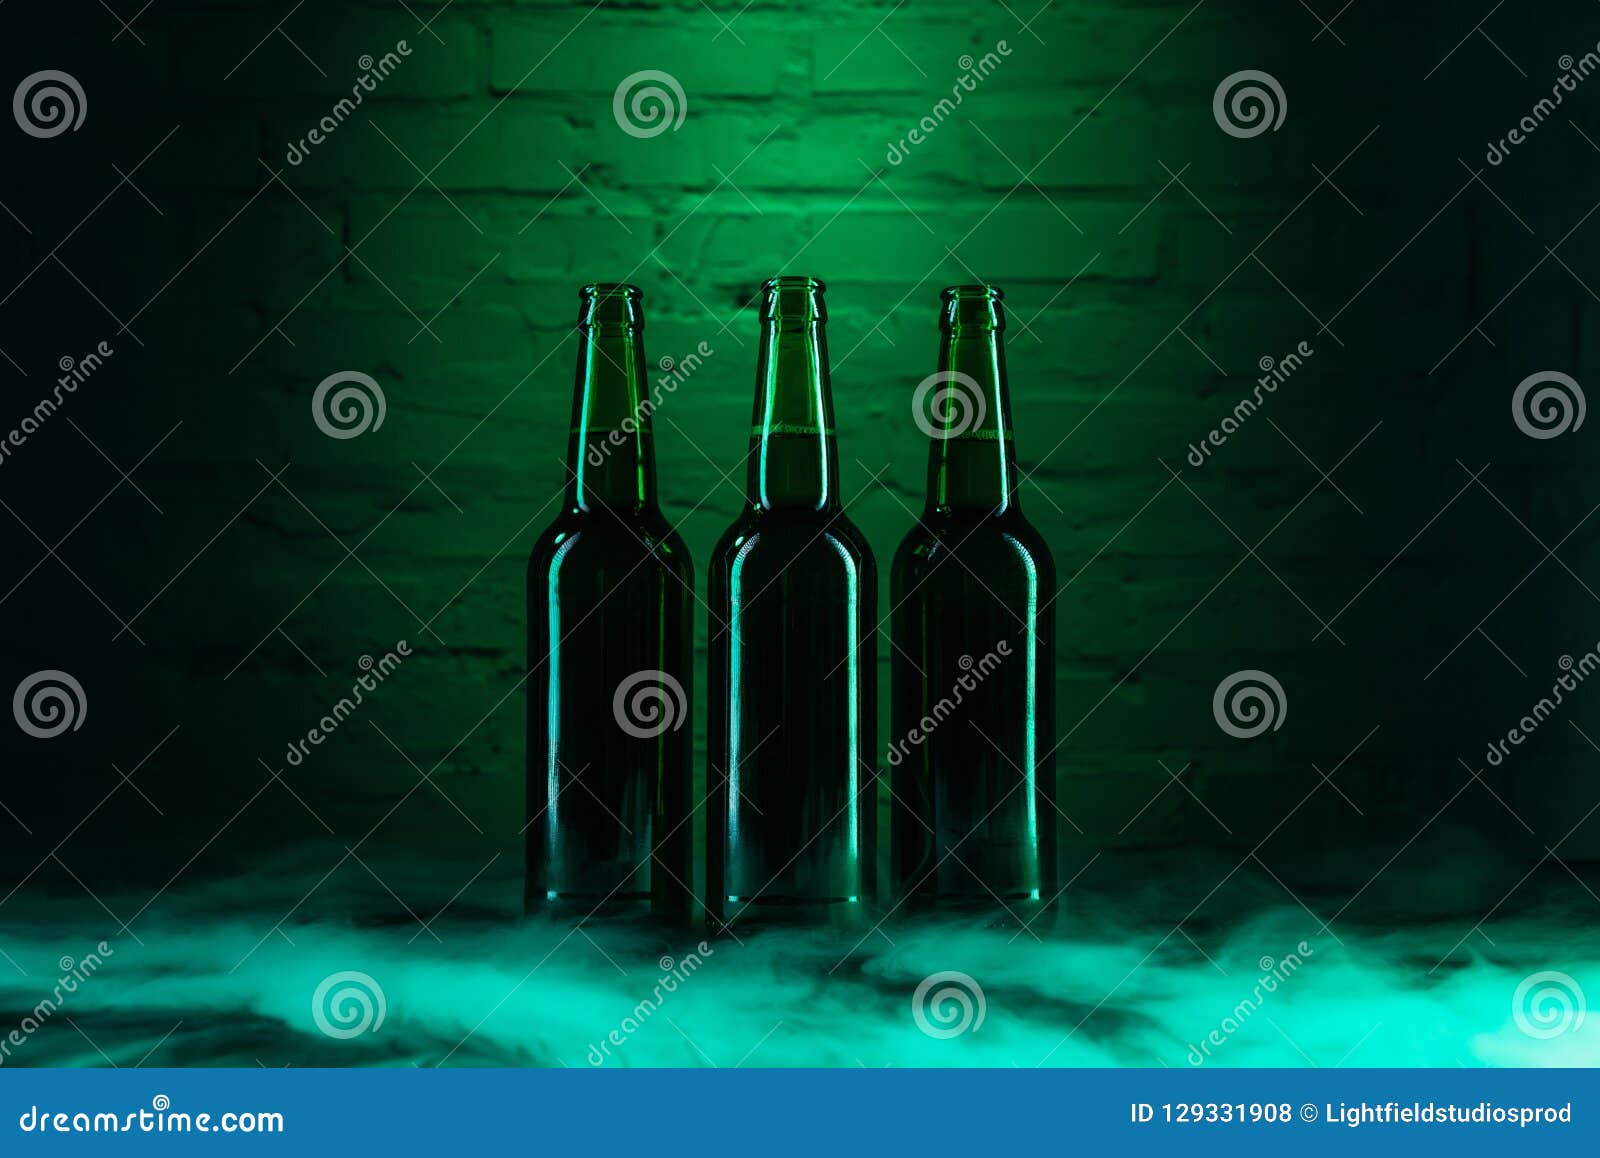 three open green beer bottles and smoke in green